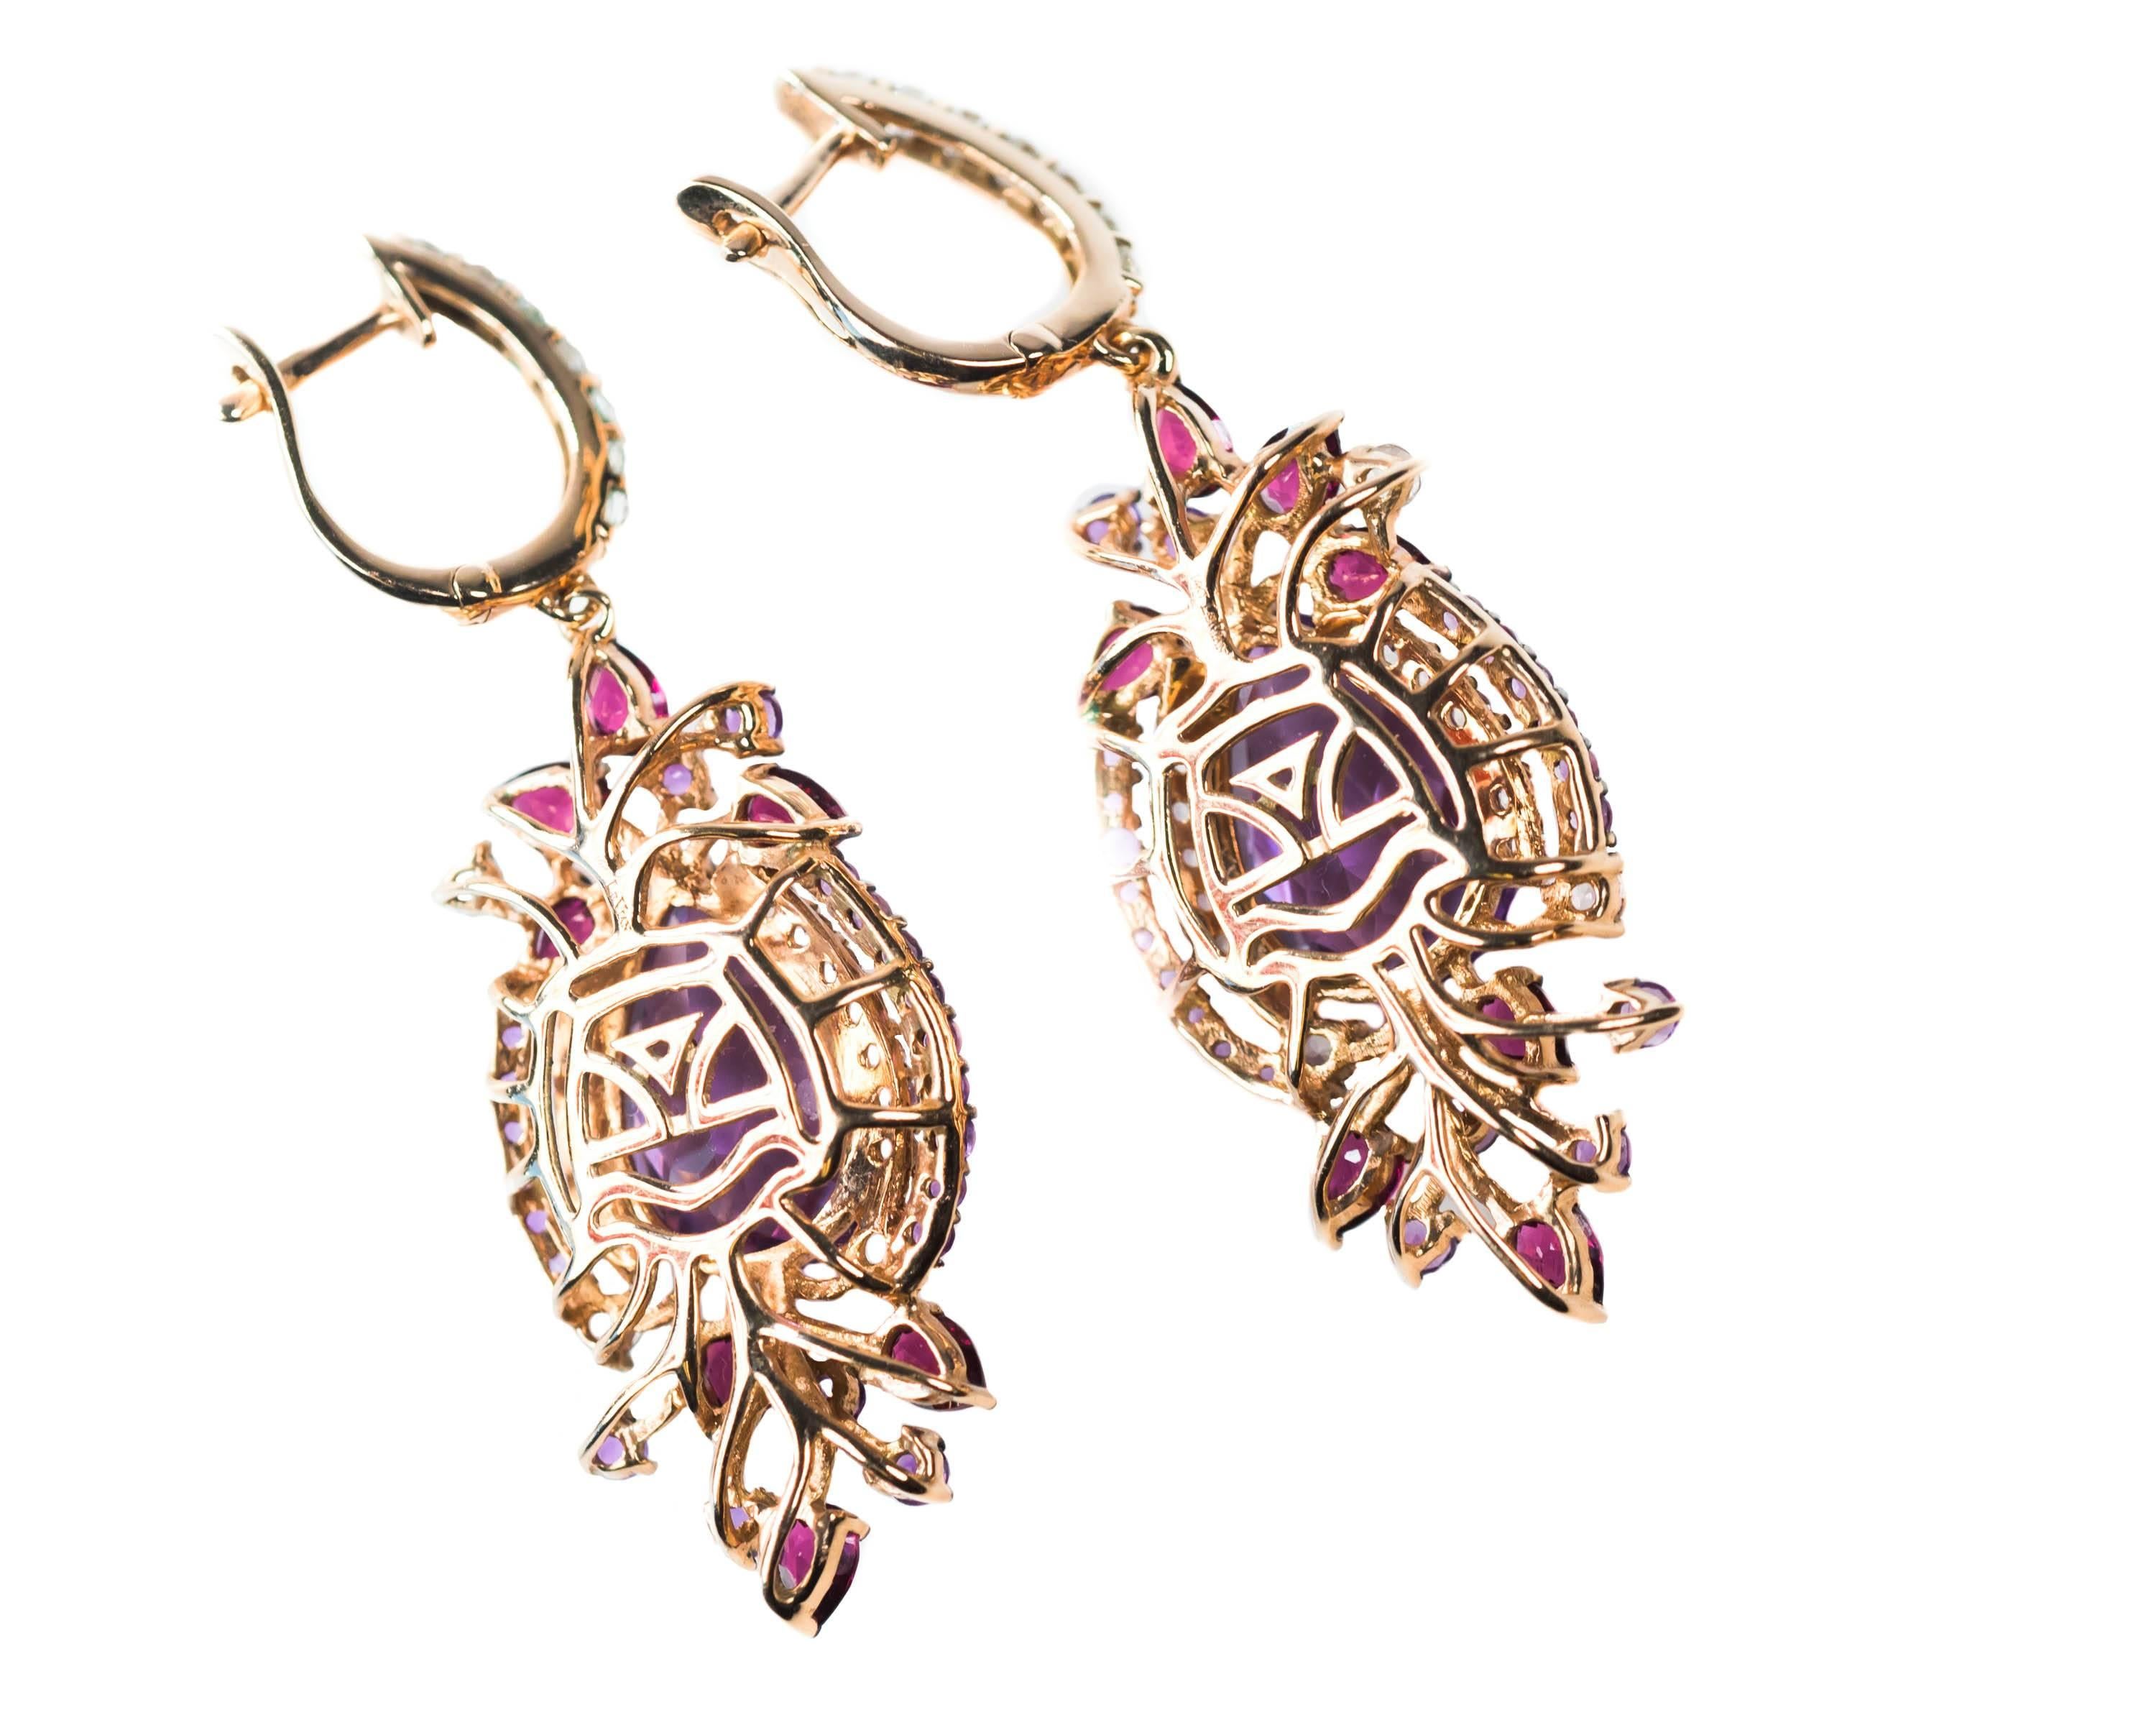 Le Vian Crazy Collection Multi-Stone Drop Earrings in 14 Karat Strawberry Rose Gold - 13.5 carat total weight

Features 9.75 carat total weight pear and round-cut Purple amethyst, 2.5 carat total weight pear-cut rhodolite and white topaz accents.